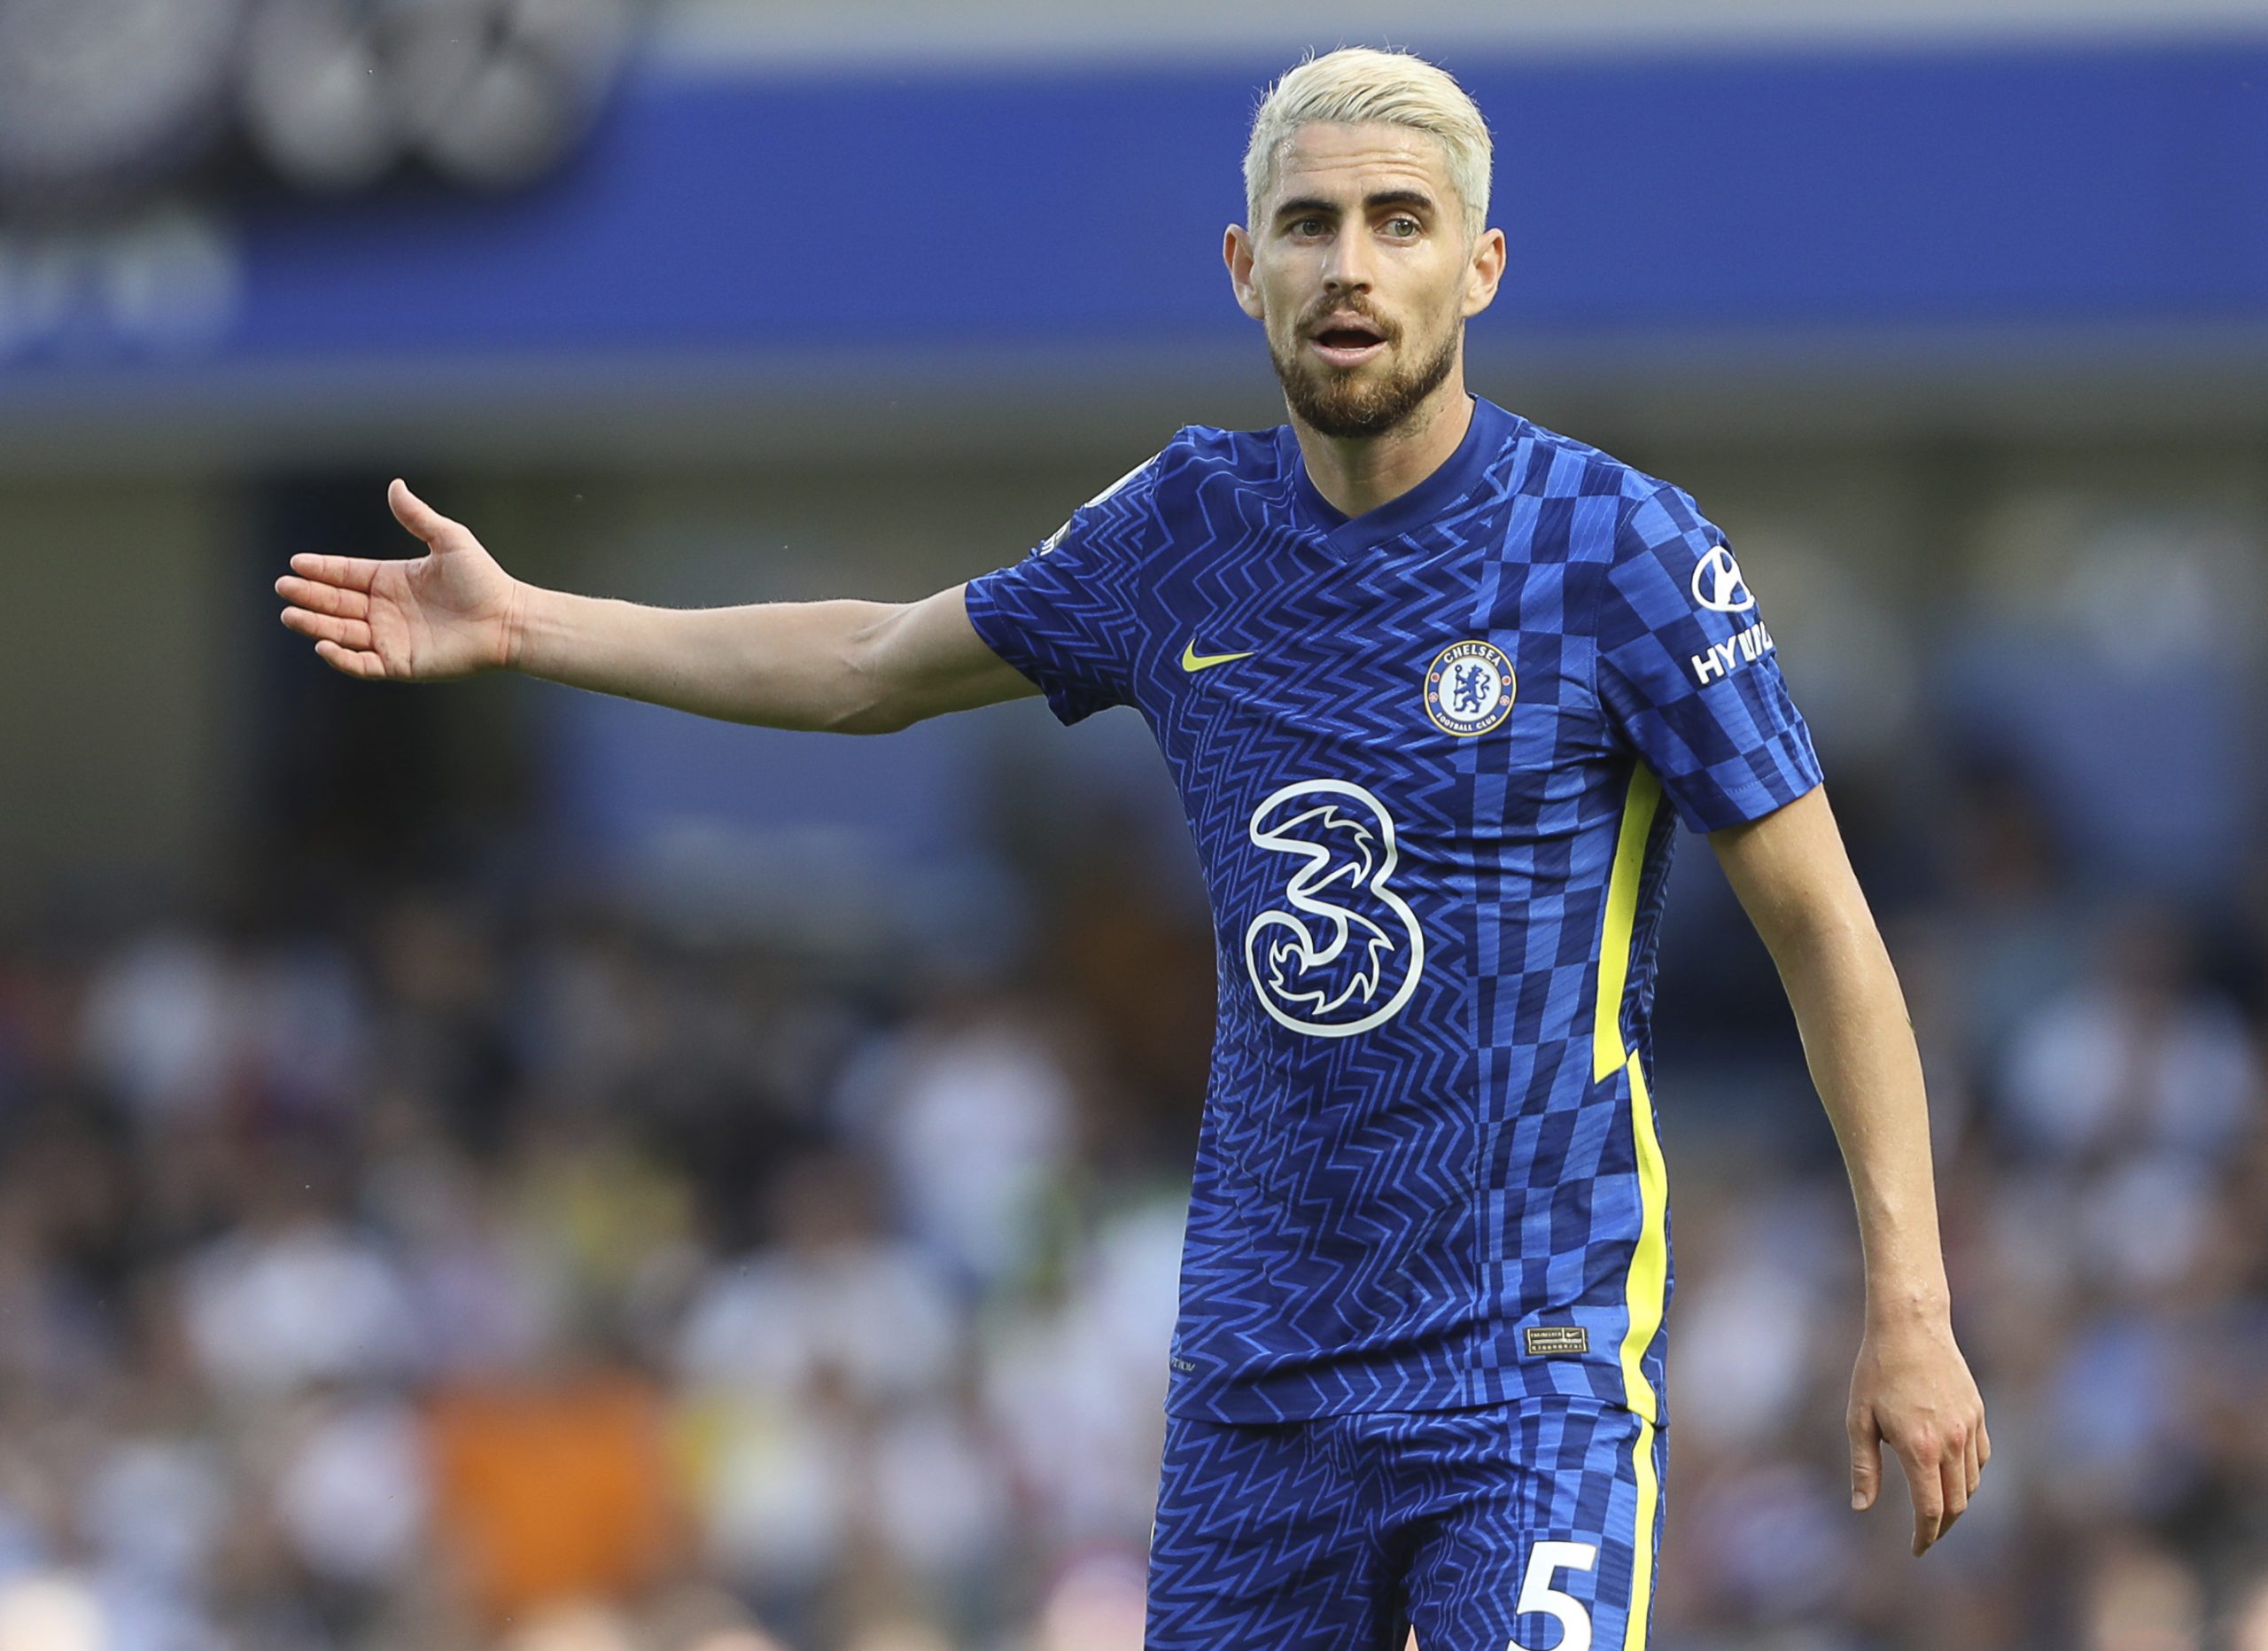 August 14, 2021, London, United Kingdom: London, England, 14th August 2021. Jorginho of Chelsea during the Premier League match at Stamford Bridge, London. Picture credit should read: Paul Terry / Sportimage(Credit Image: © Paul Terry/CSM via ZUMA Wire) (Cal Sport Media via AP Images)